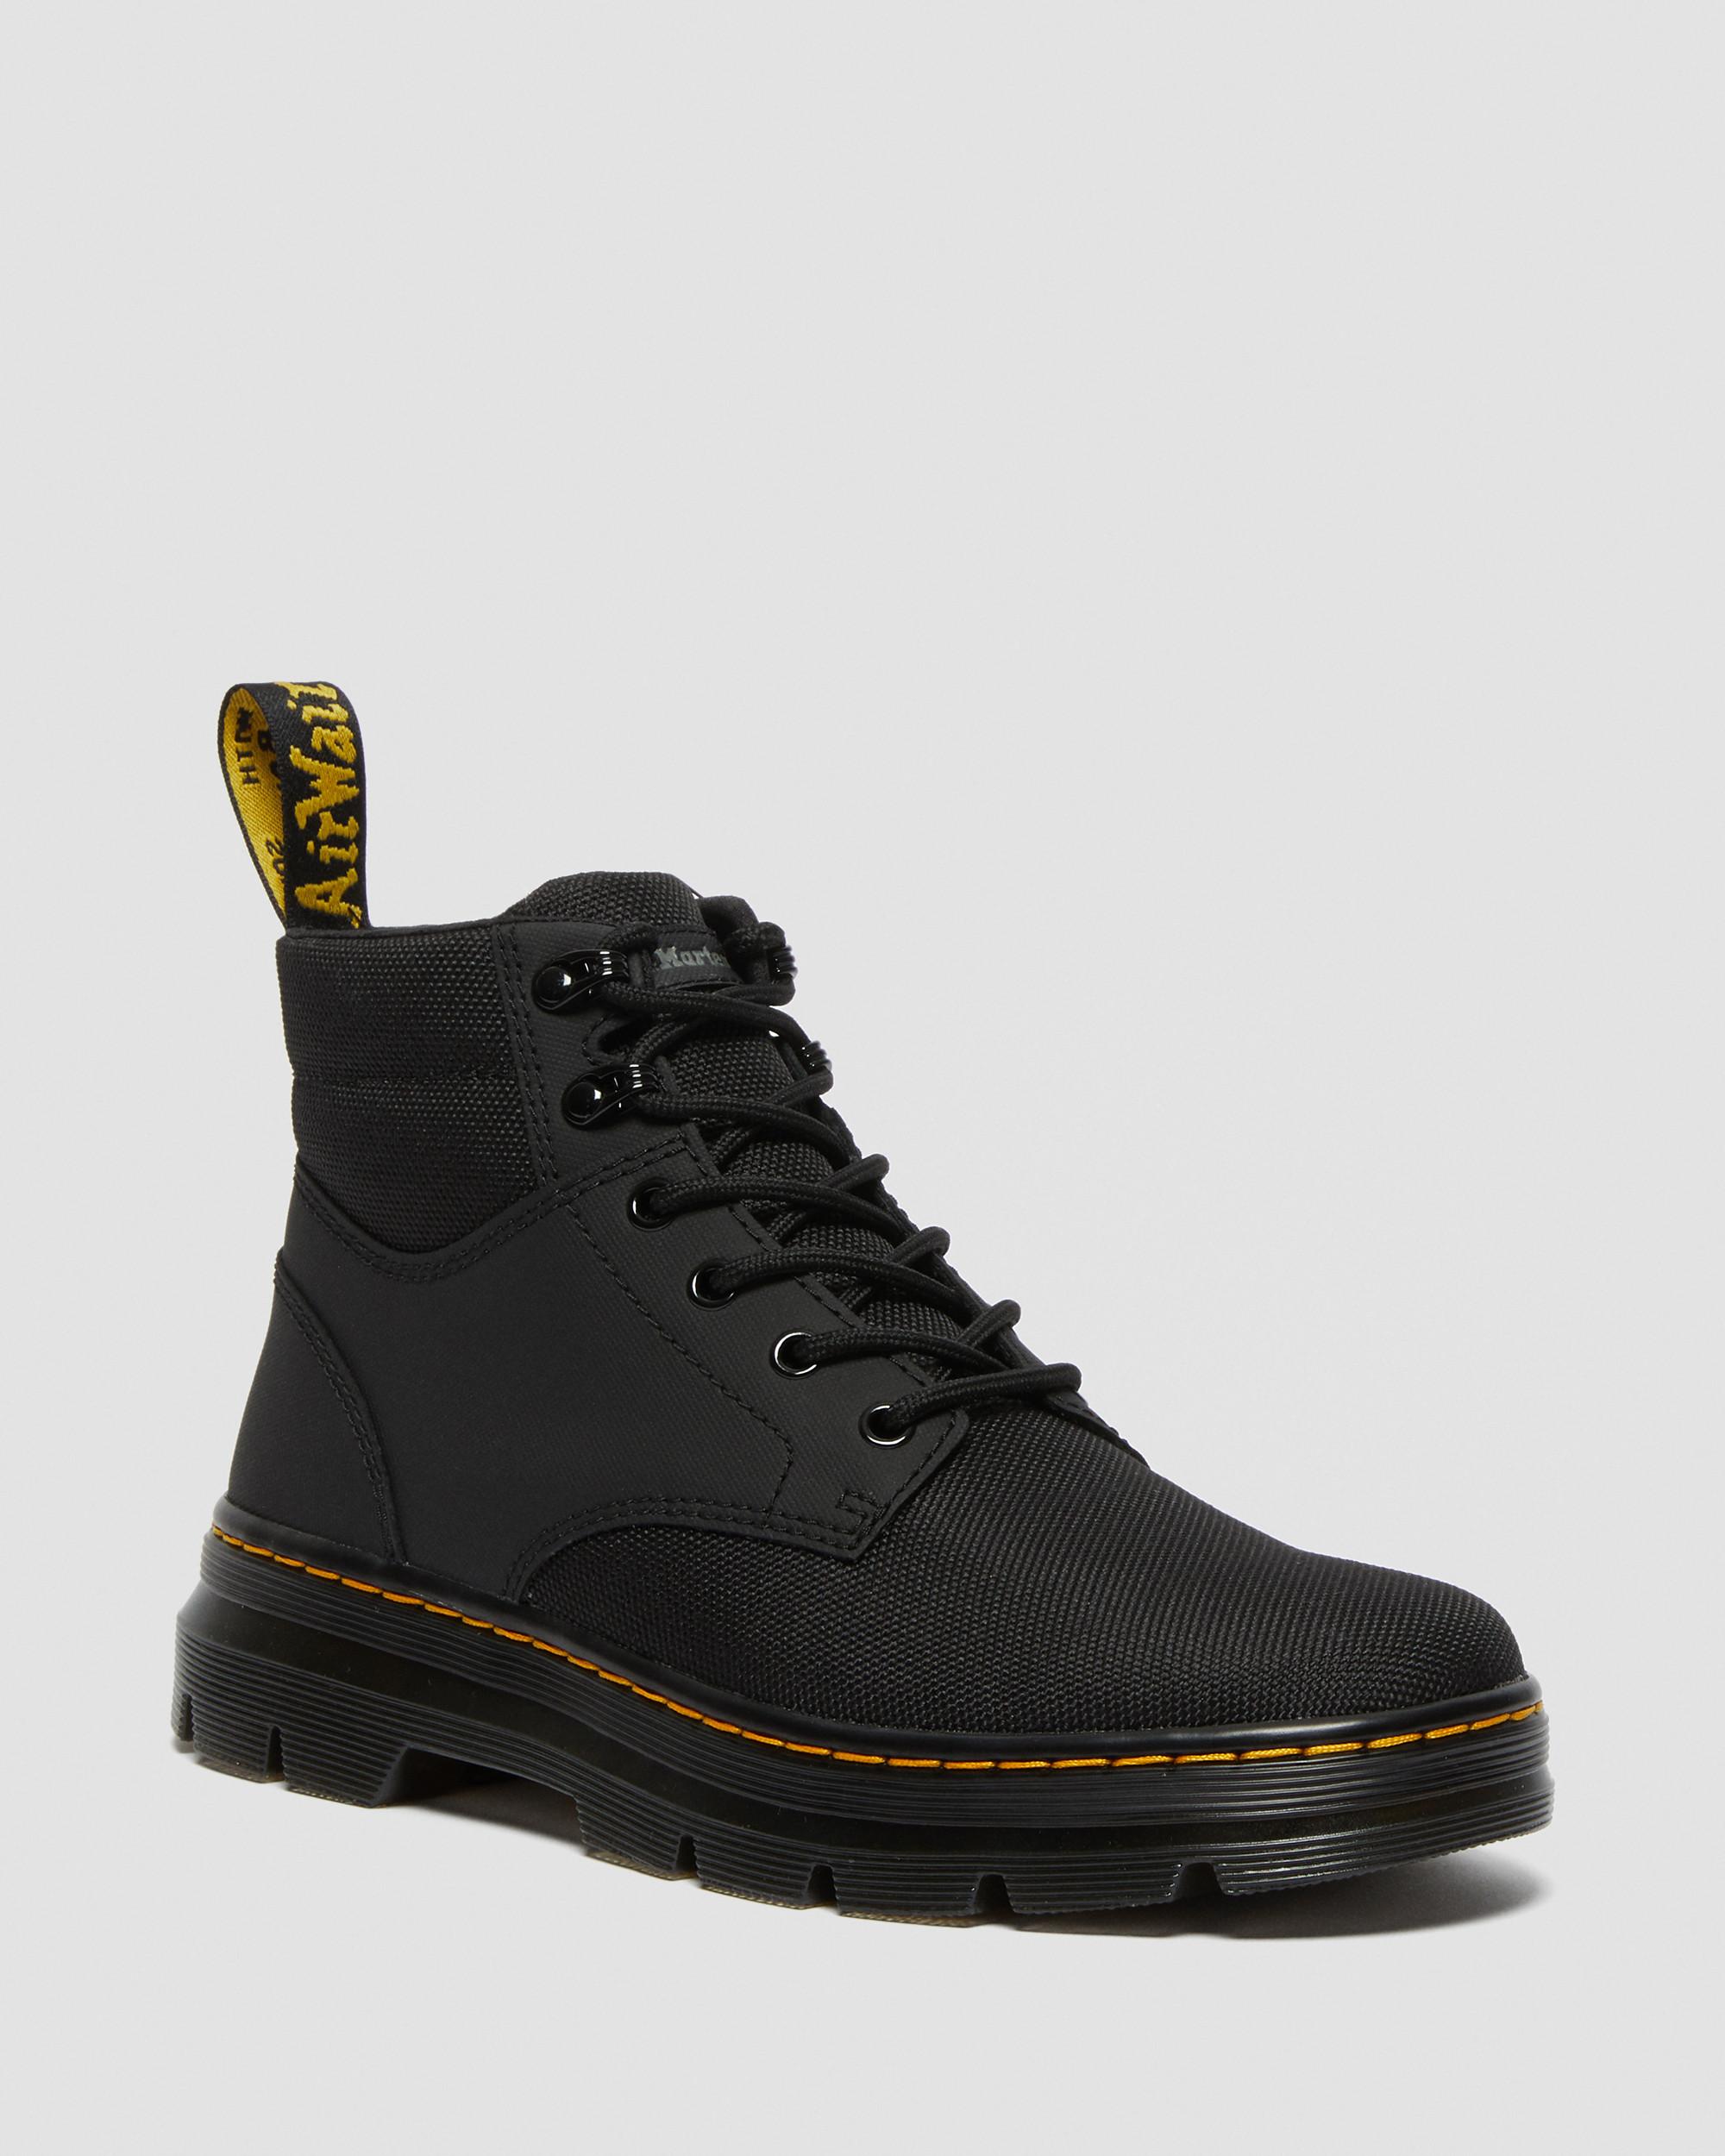 Combs Tech II Extra Tough Utility Boots in Black | Dr. Martens